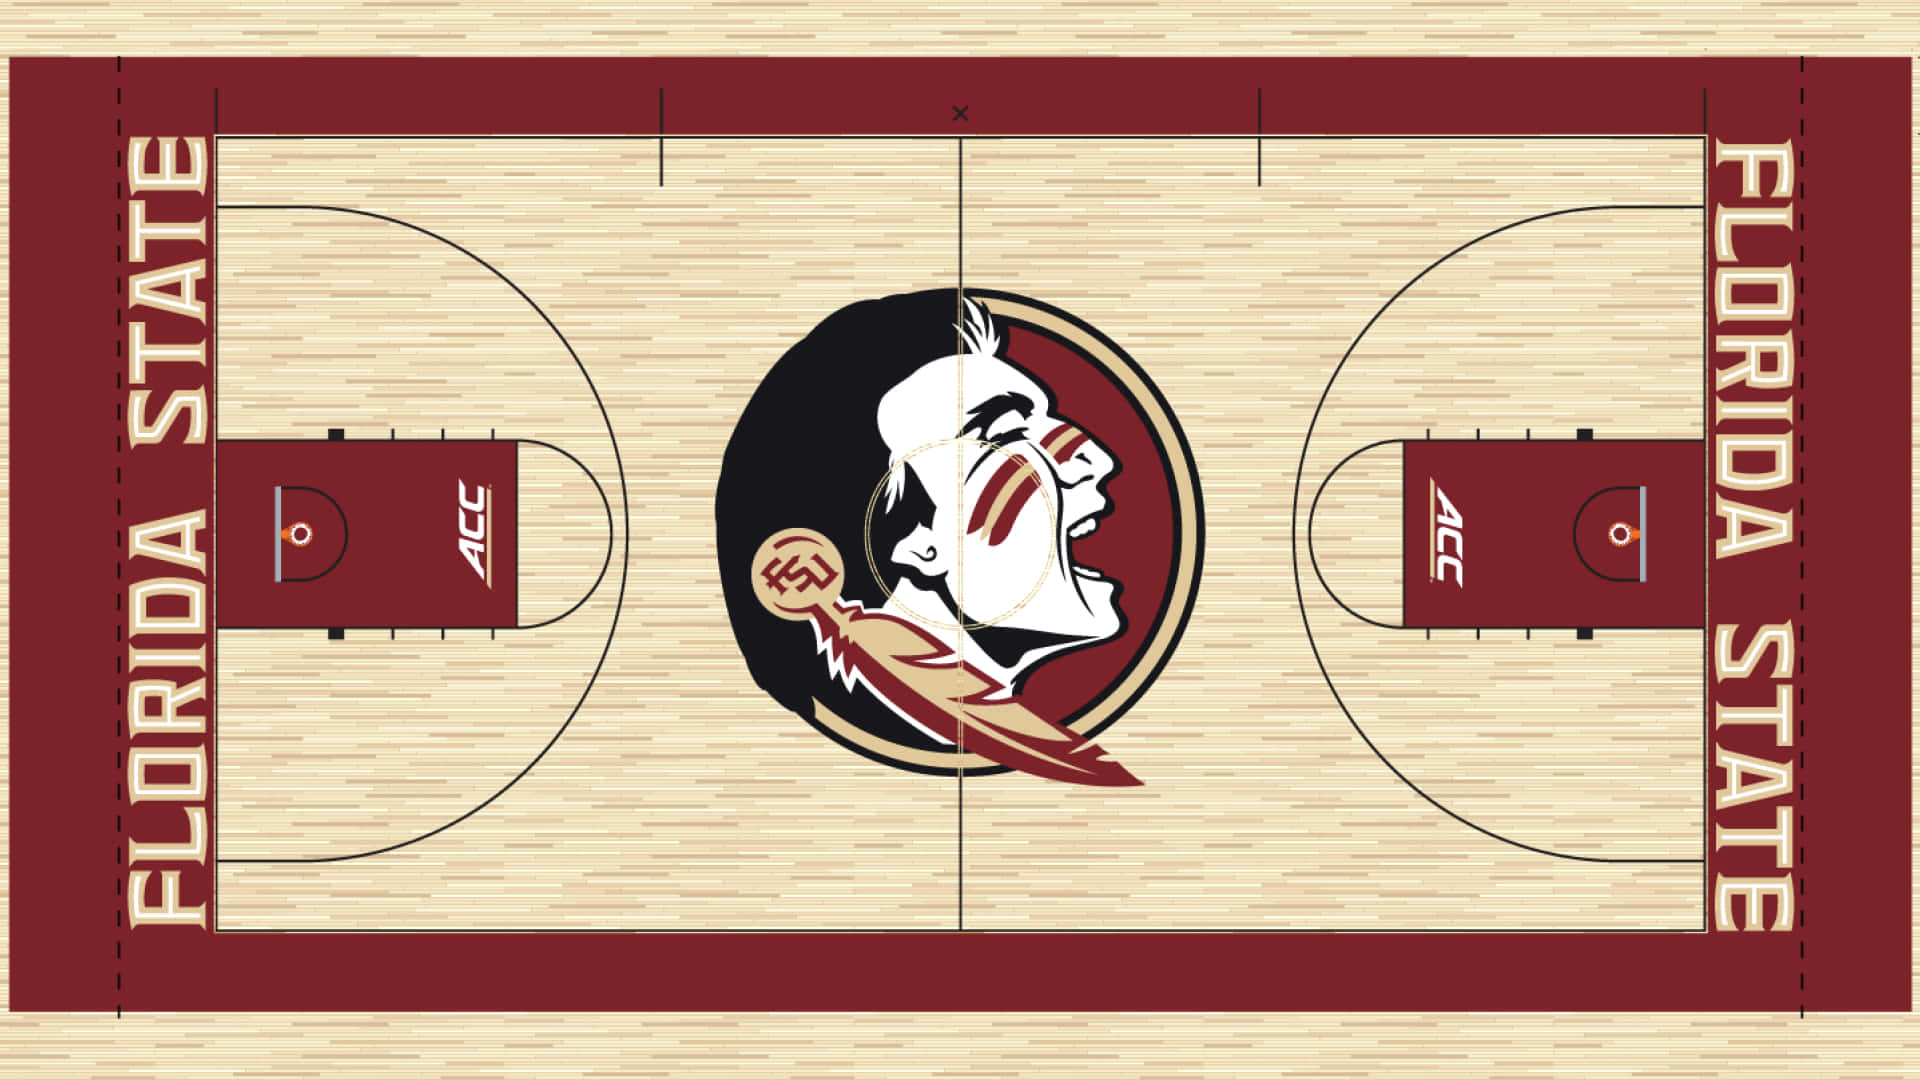 Join the Garnet&Gold and cheer on the Seminoles! Wallpaper